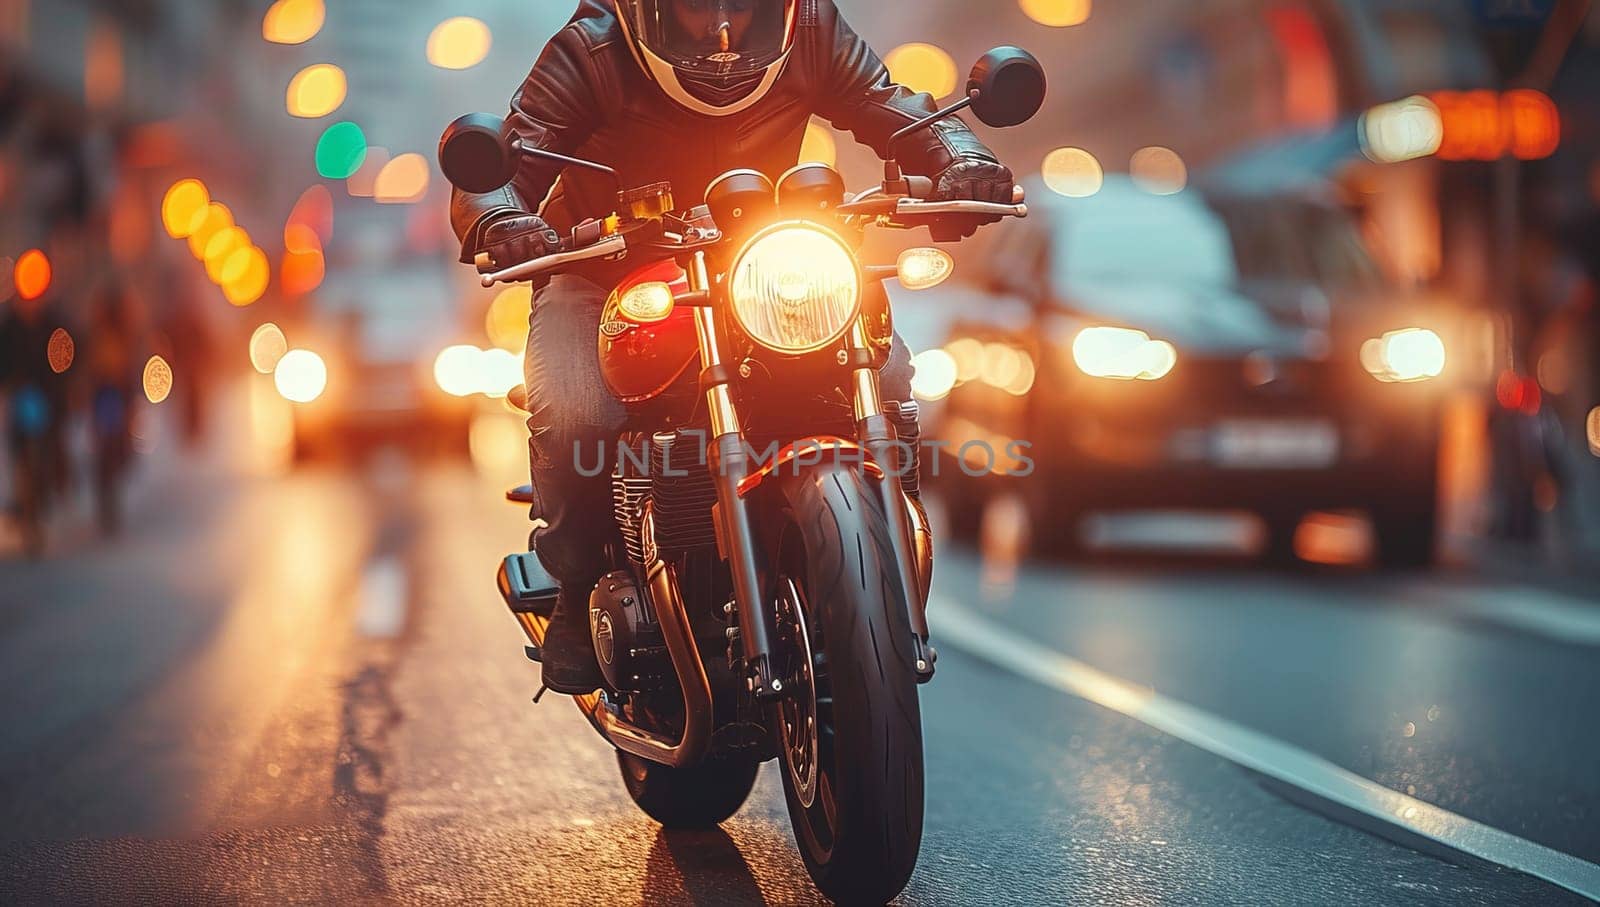 Motorcycle rider on the road in the evening. Biker on a motorcycle. by ailike